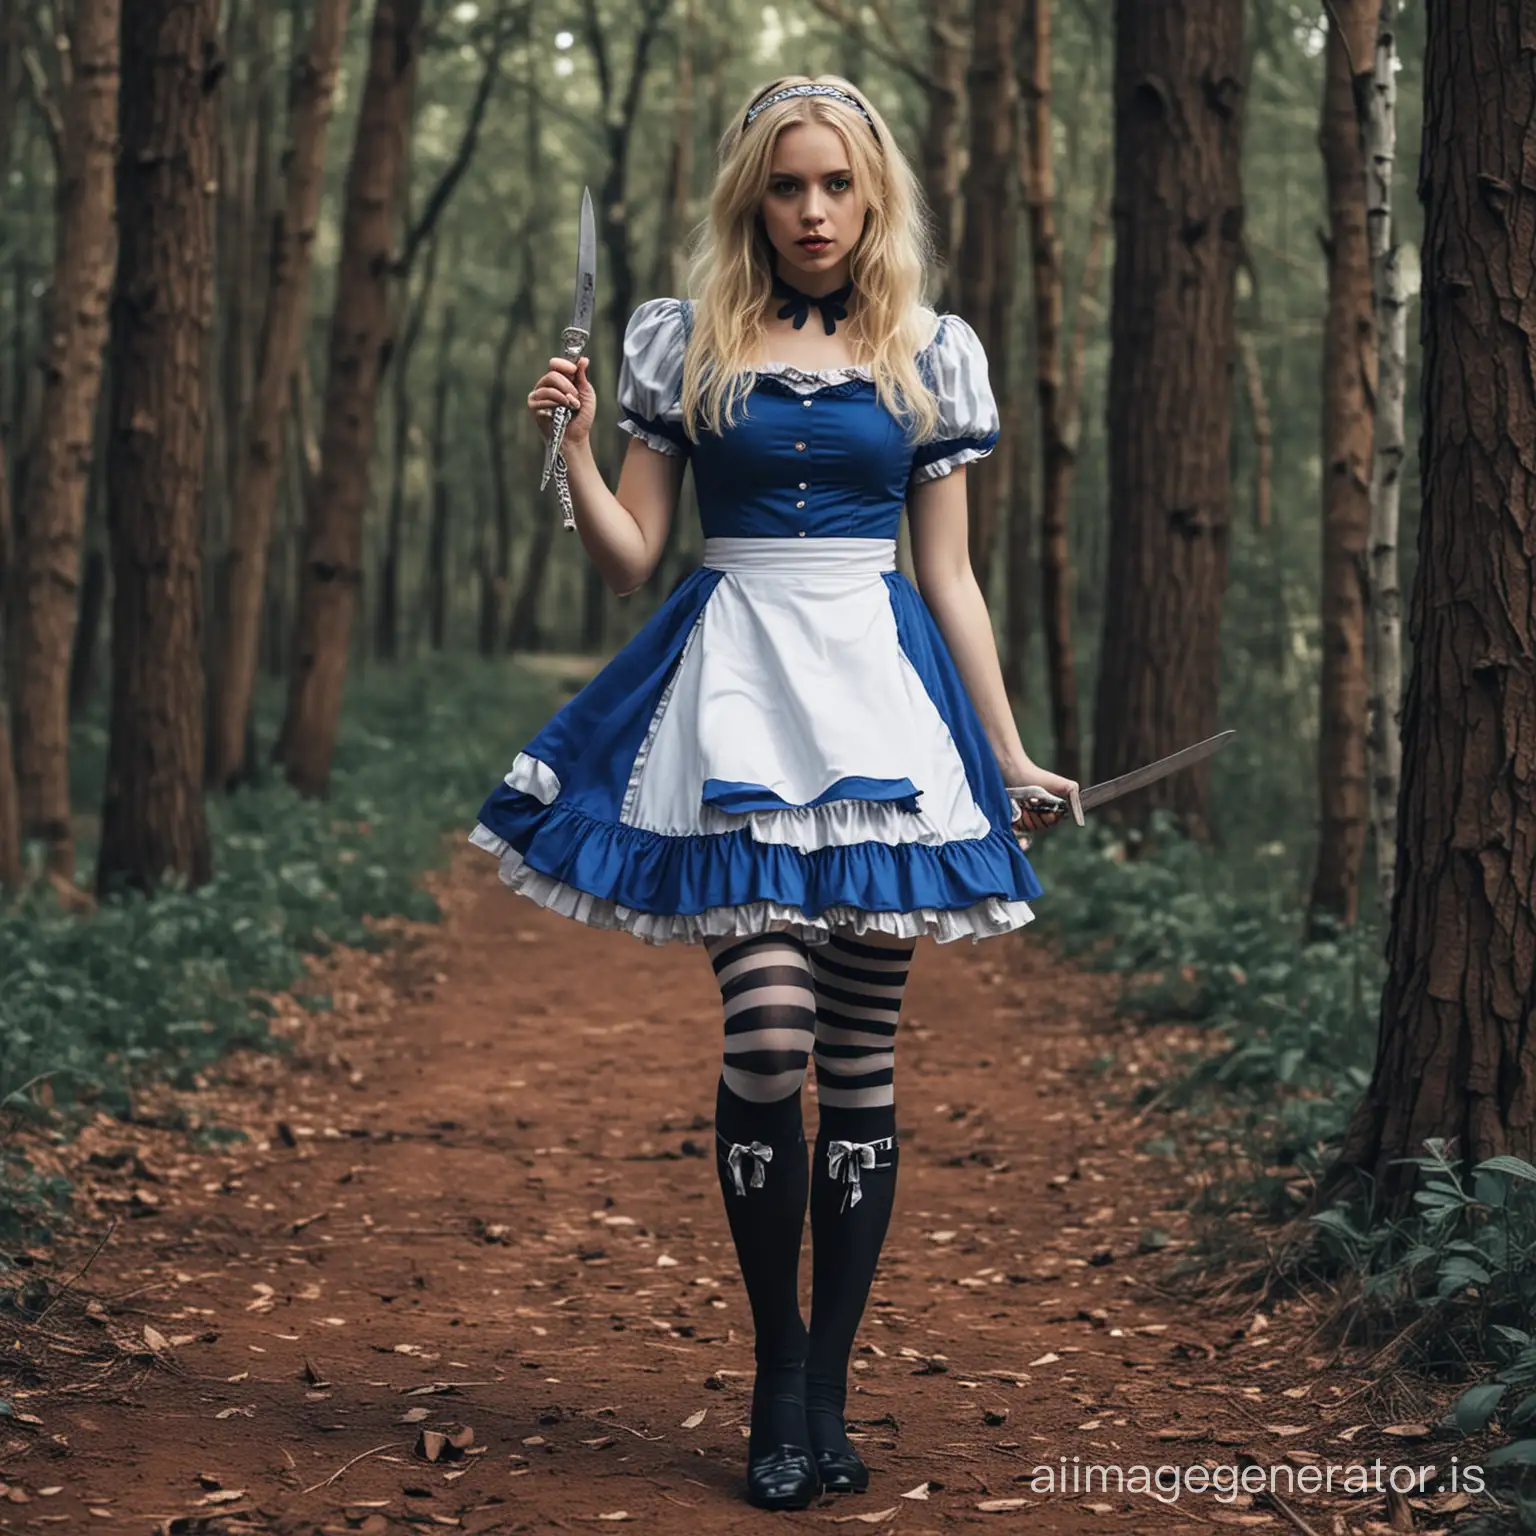 Blonde-Alice-in-Wonderland-with-Striped-Stockings-and-Knife-in-Enchanted-Forest